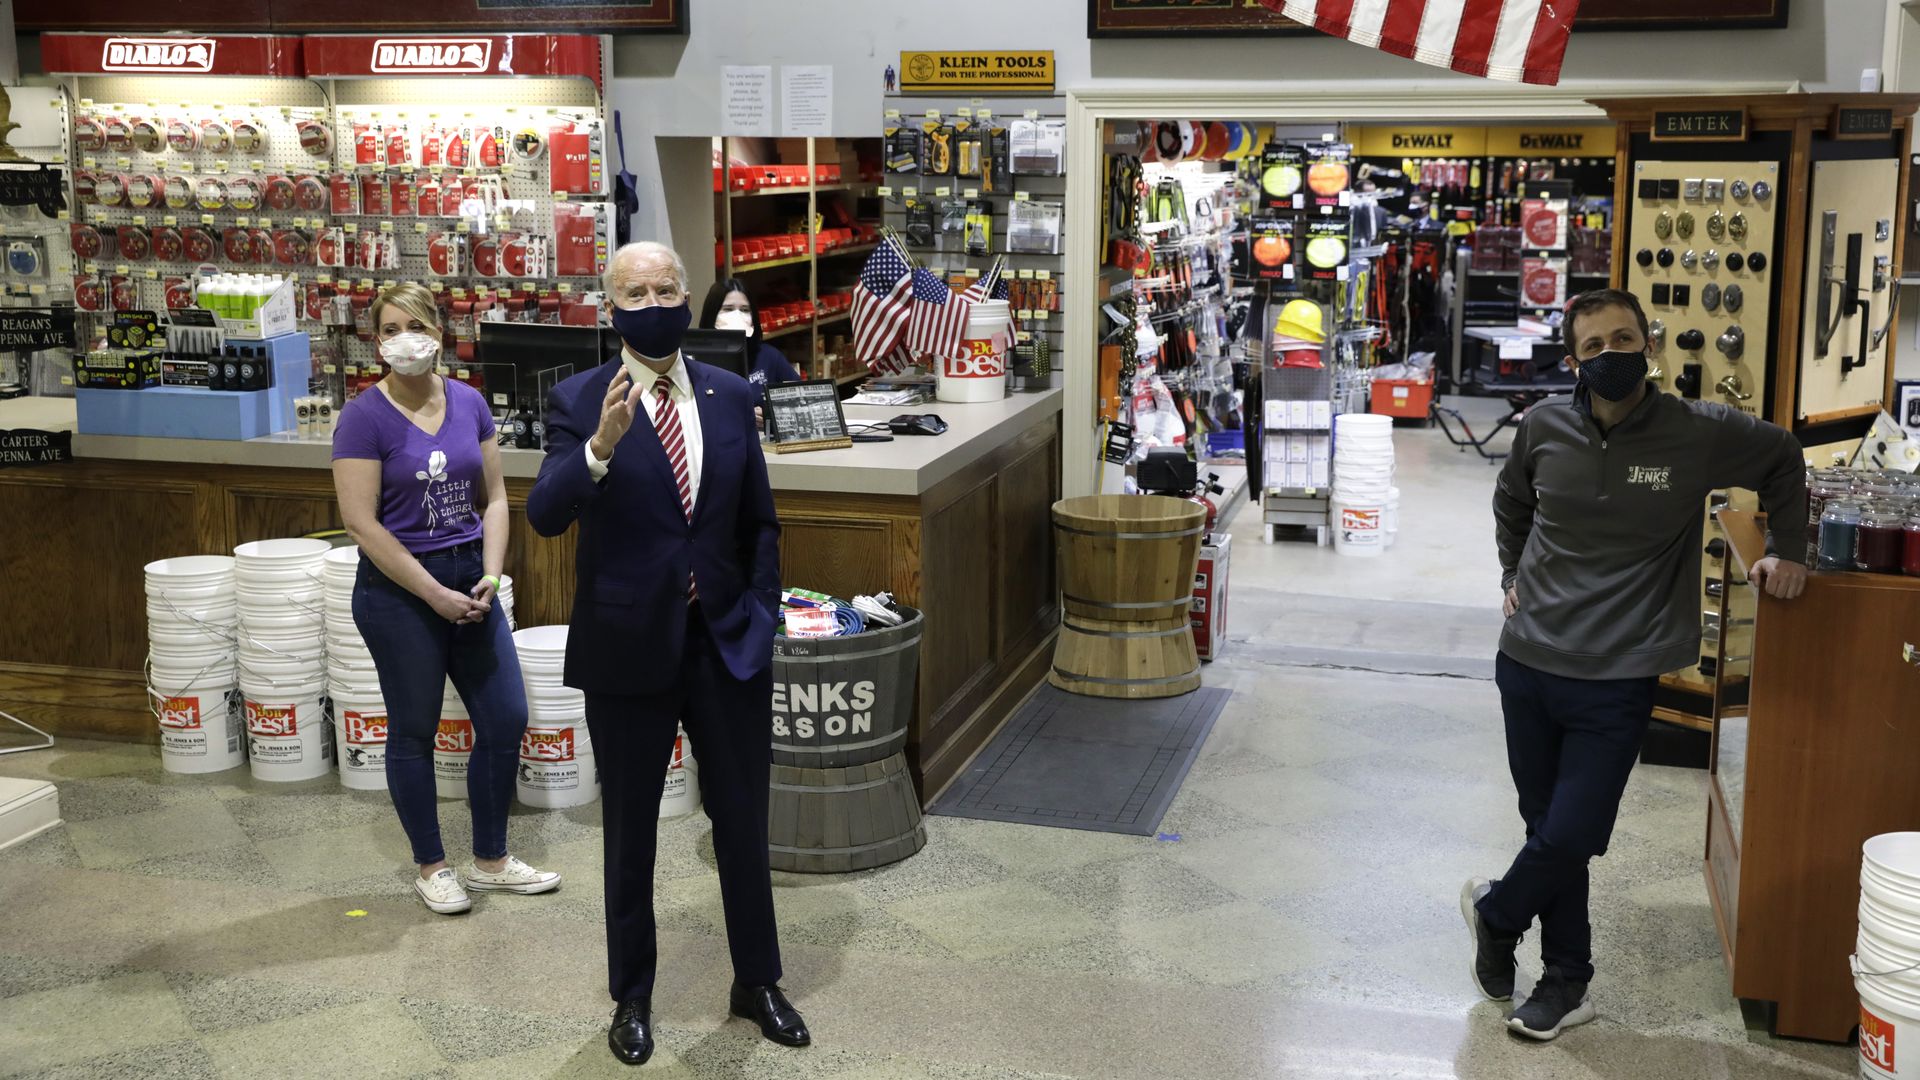 President Biden is seen speaking to workers as he visits a hardware store in Washington to discuss his COVID-19 relief package.